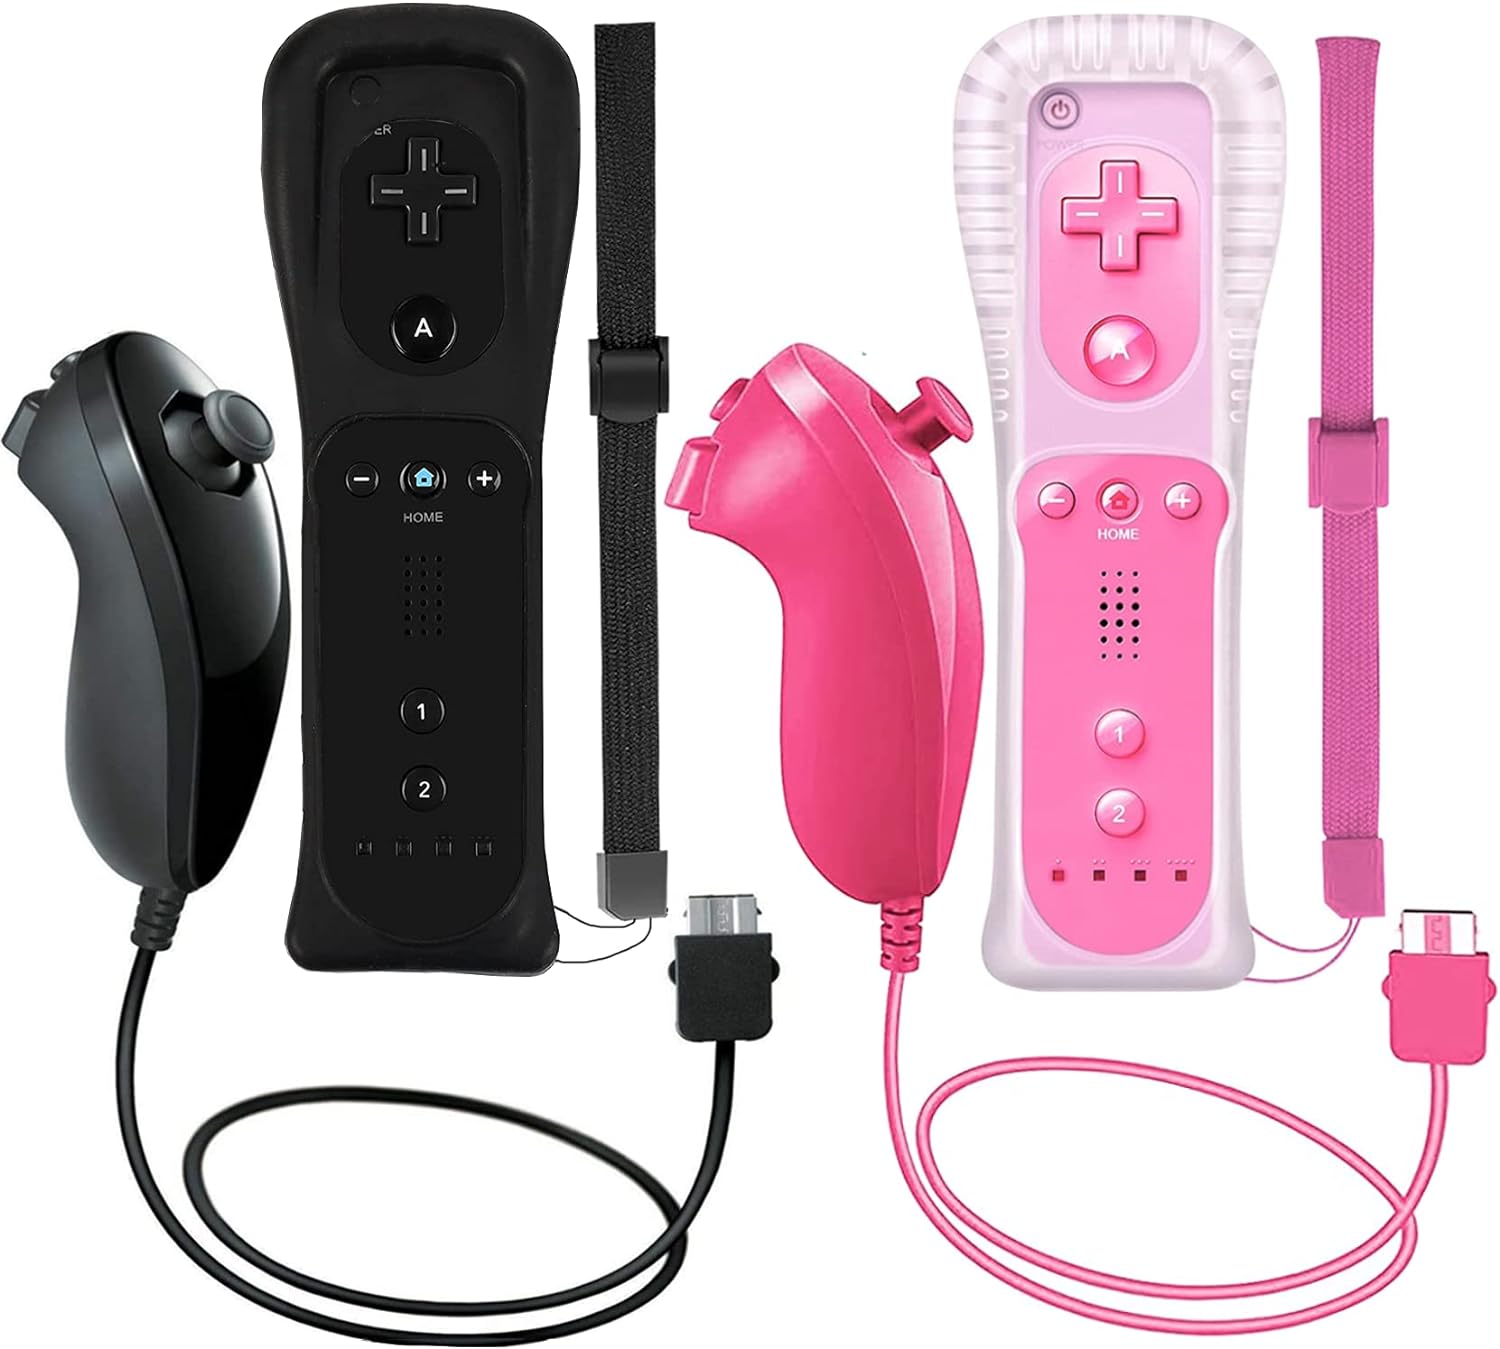 PGYFDAL 2 Packs Remote Controller and Nunchuck for Wii/Wii U Console, Gamepad with Silicone Case and Wrist Strap for Holiday (Black and Pink)